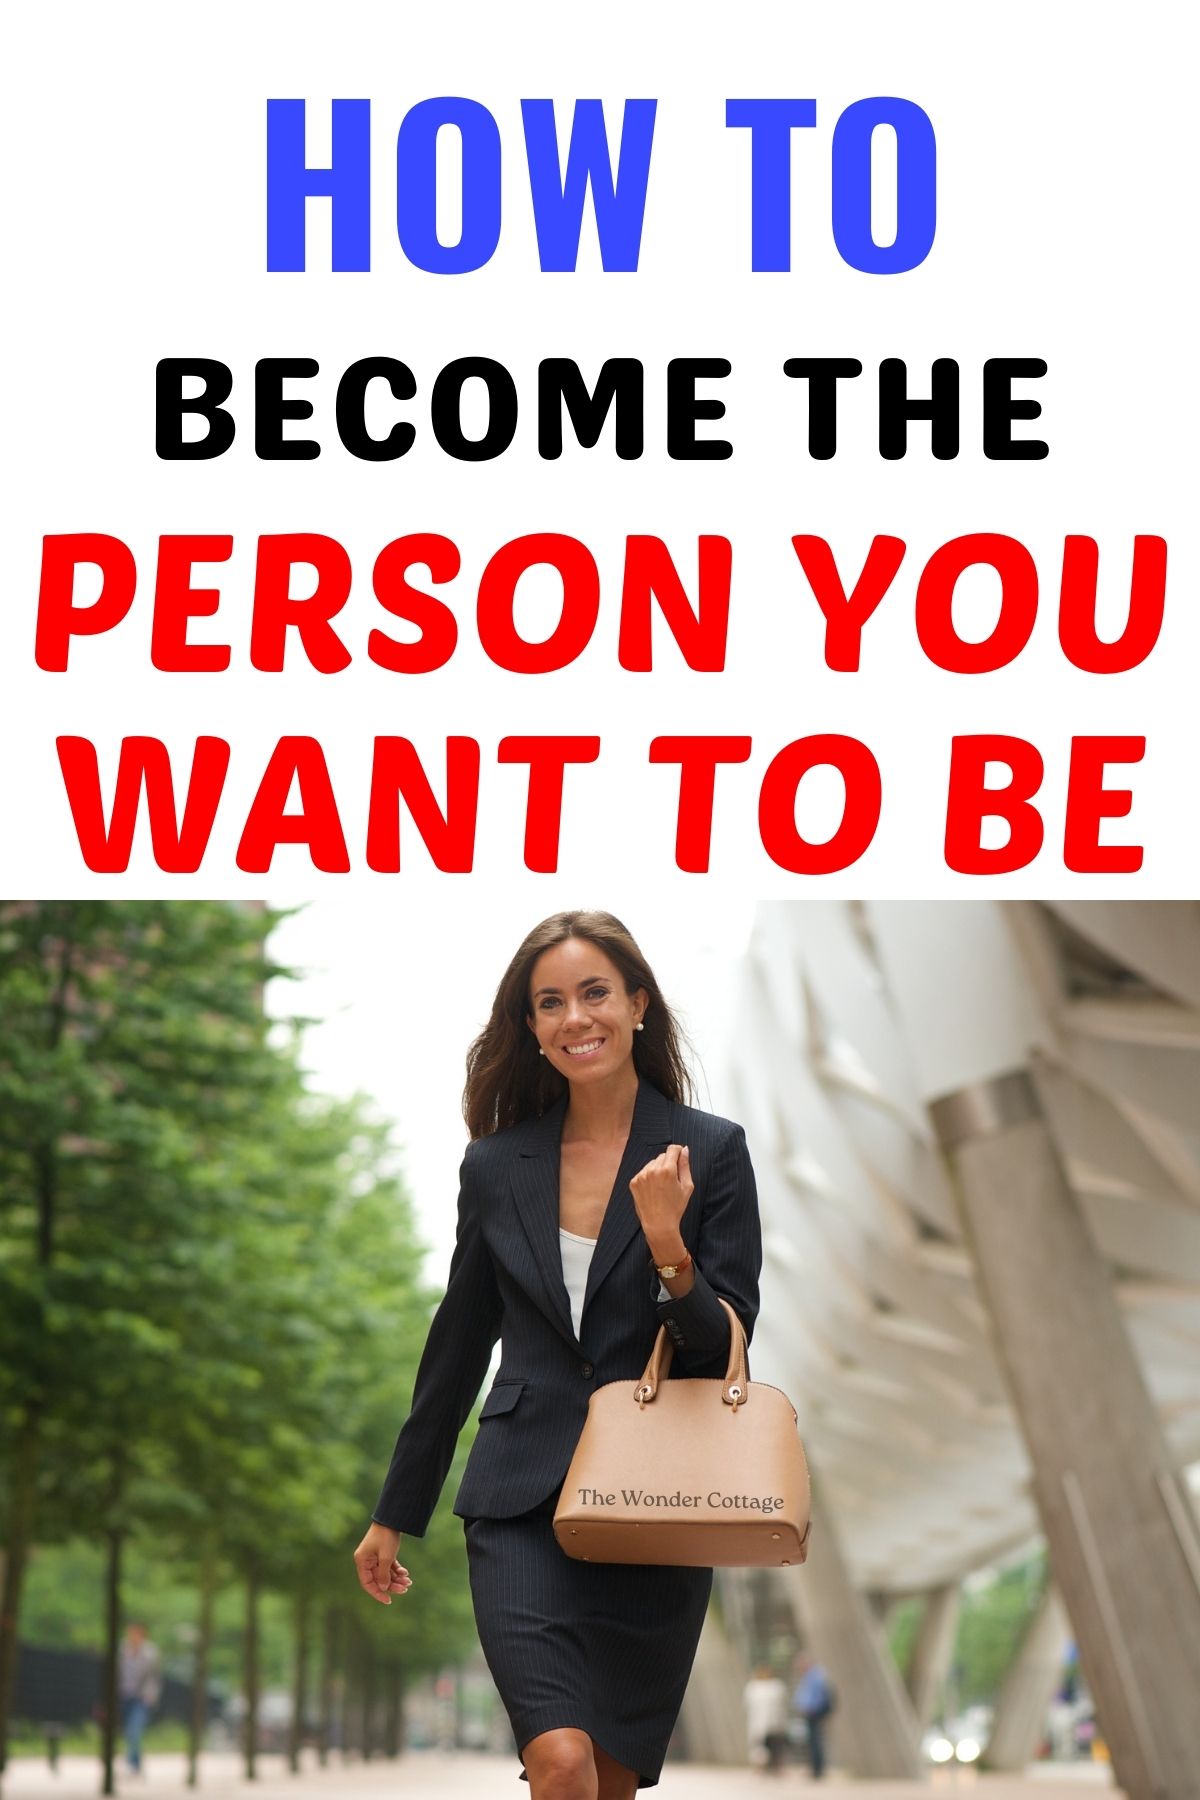 How To Become The Person You Want To Be